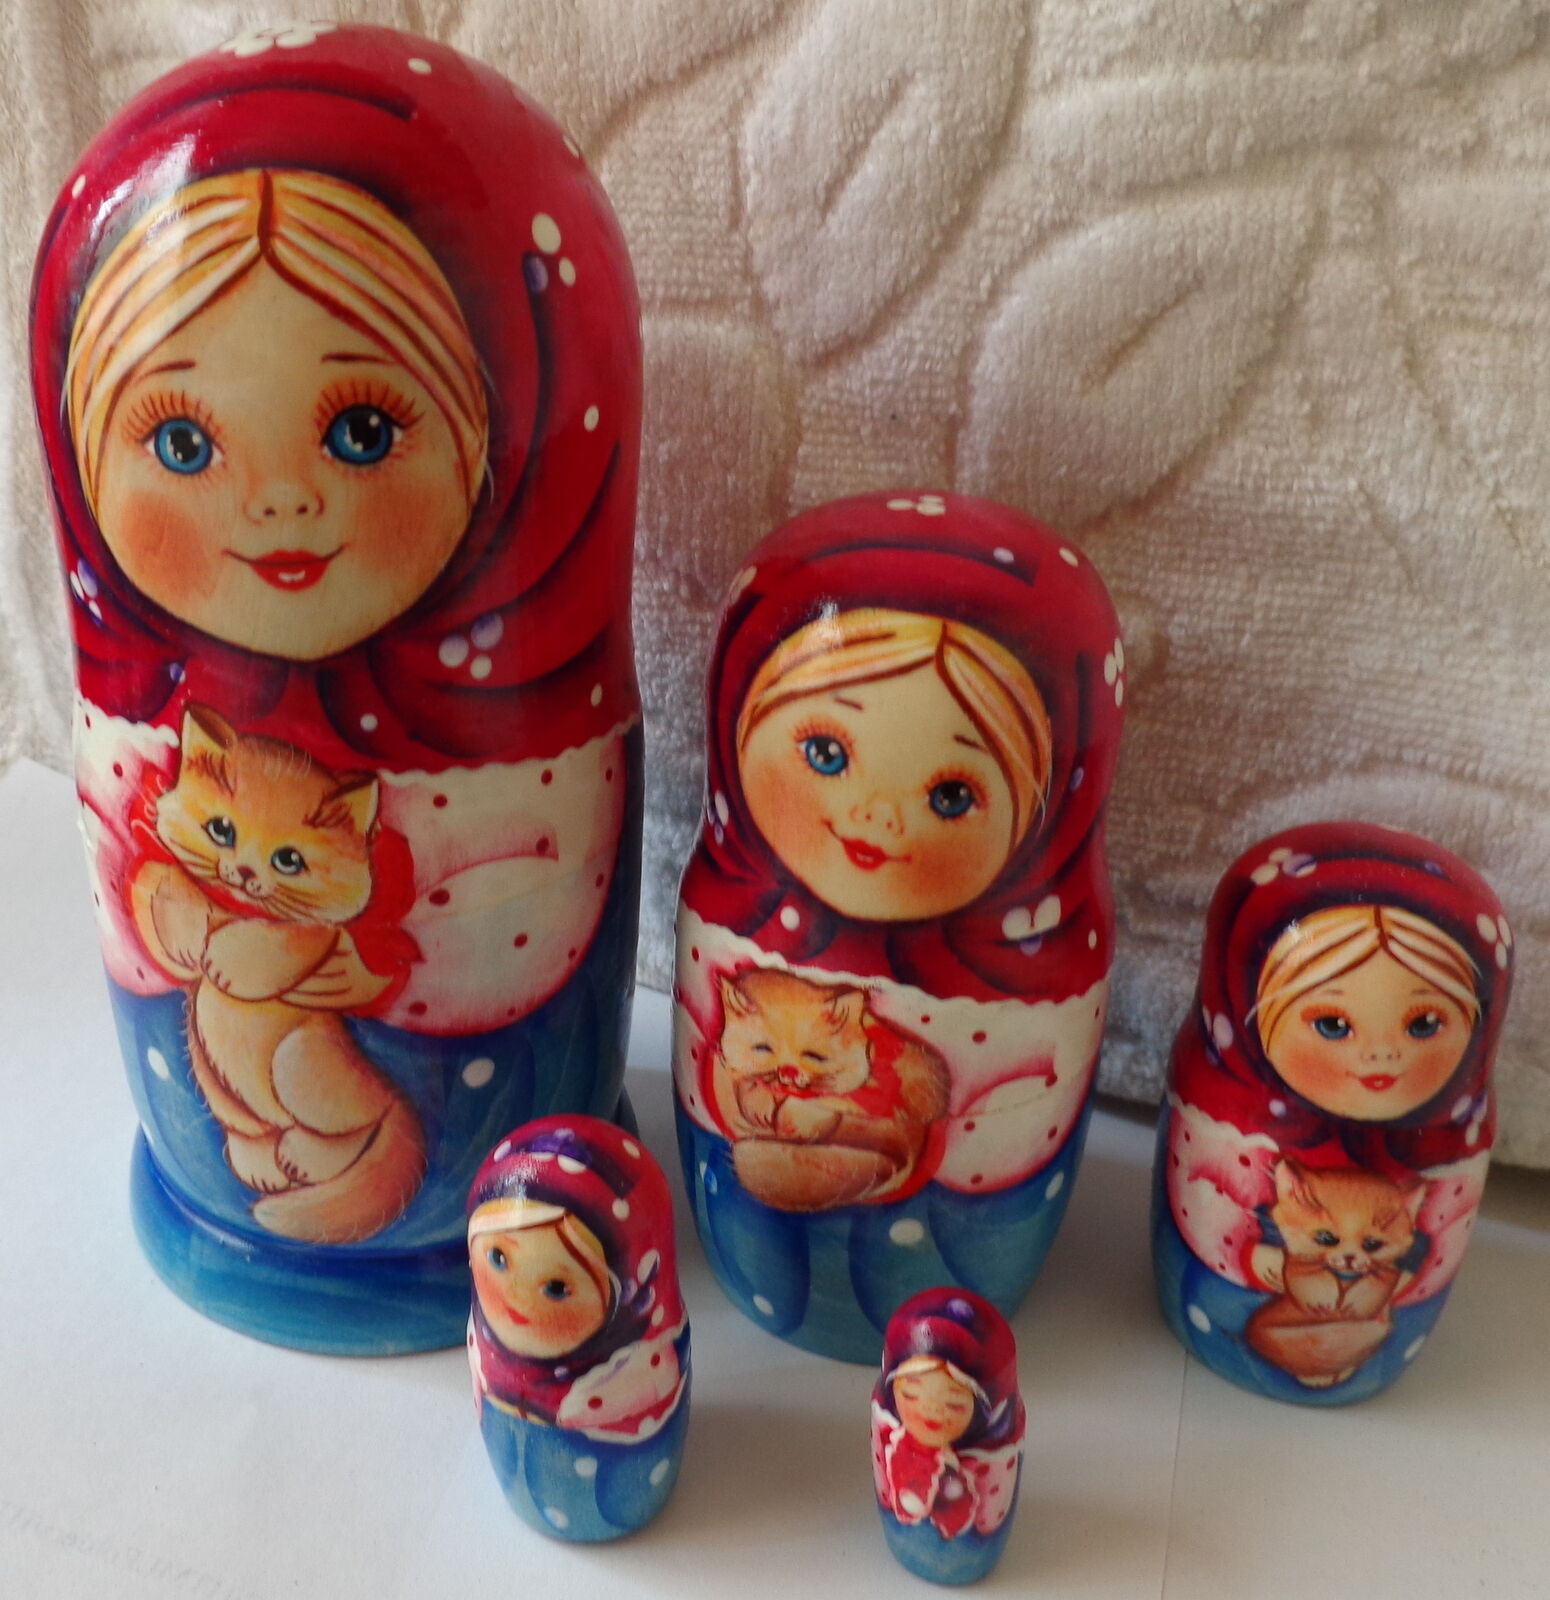 Superb  QUALITY  girl with kitten    RUSSIAN NESTING DOLL 5 PCS  LARGE 6.3* 